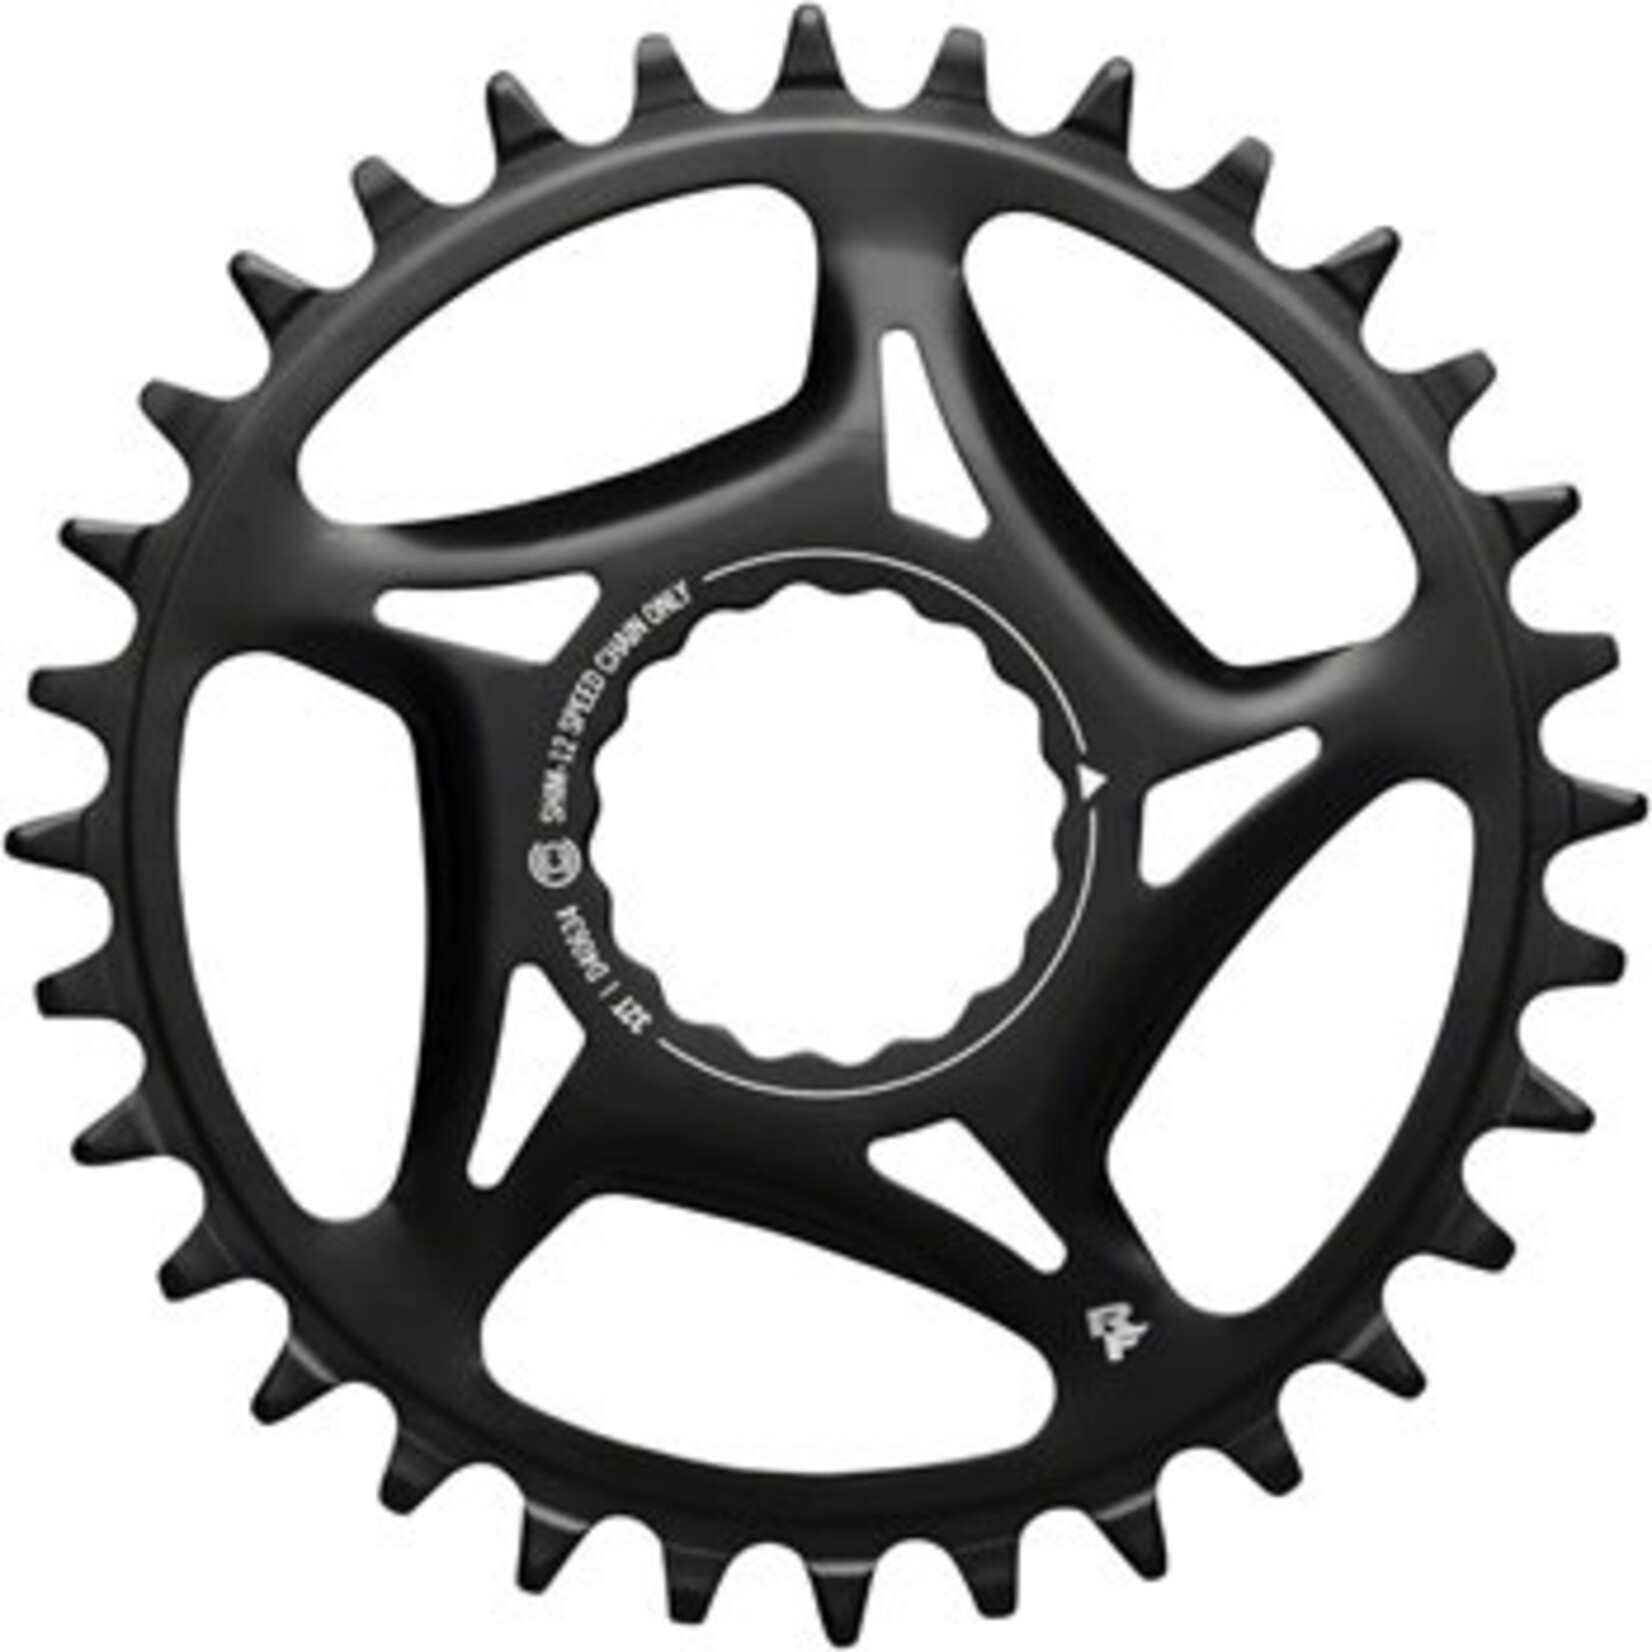 RaceFace Narrow Wide Direct Mount CINCH Steel Chainring - for Shimano 12-Speed, requires Hyperglide+ compatible chain, 32t, Black